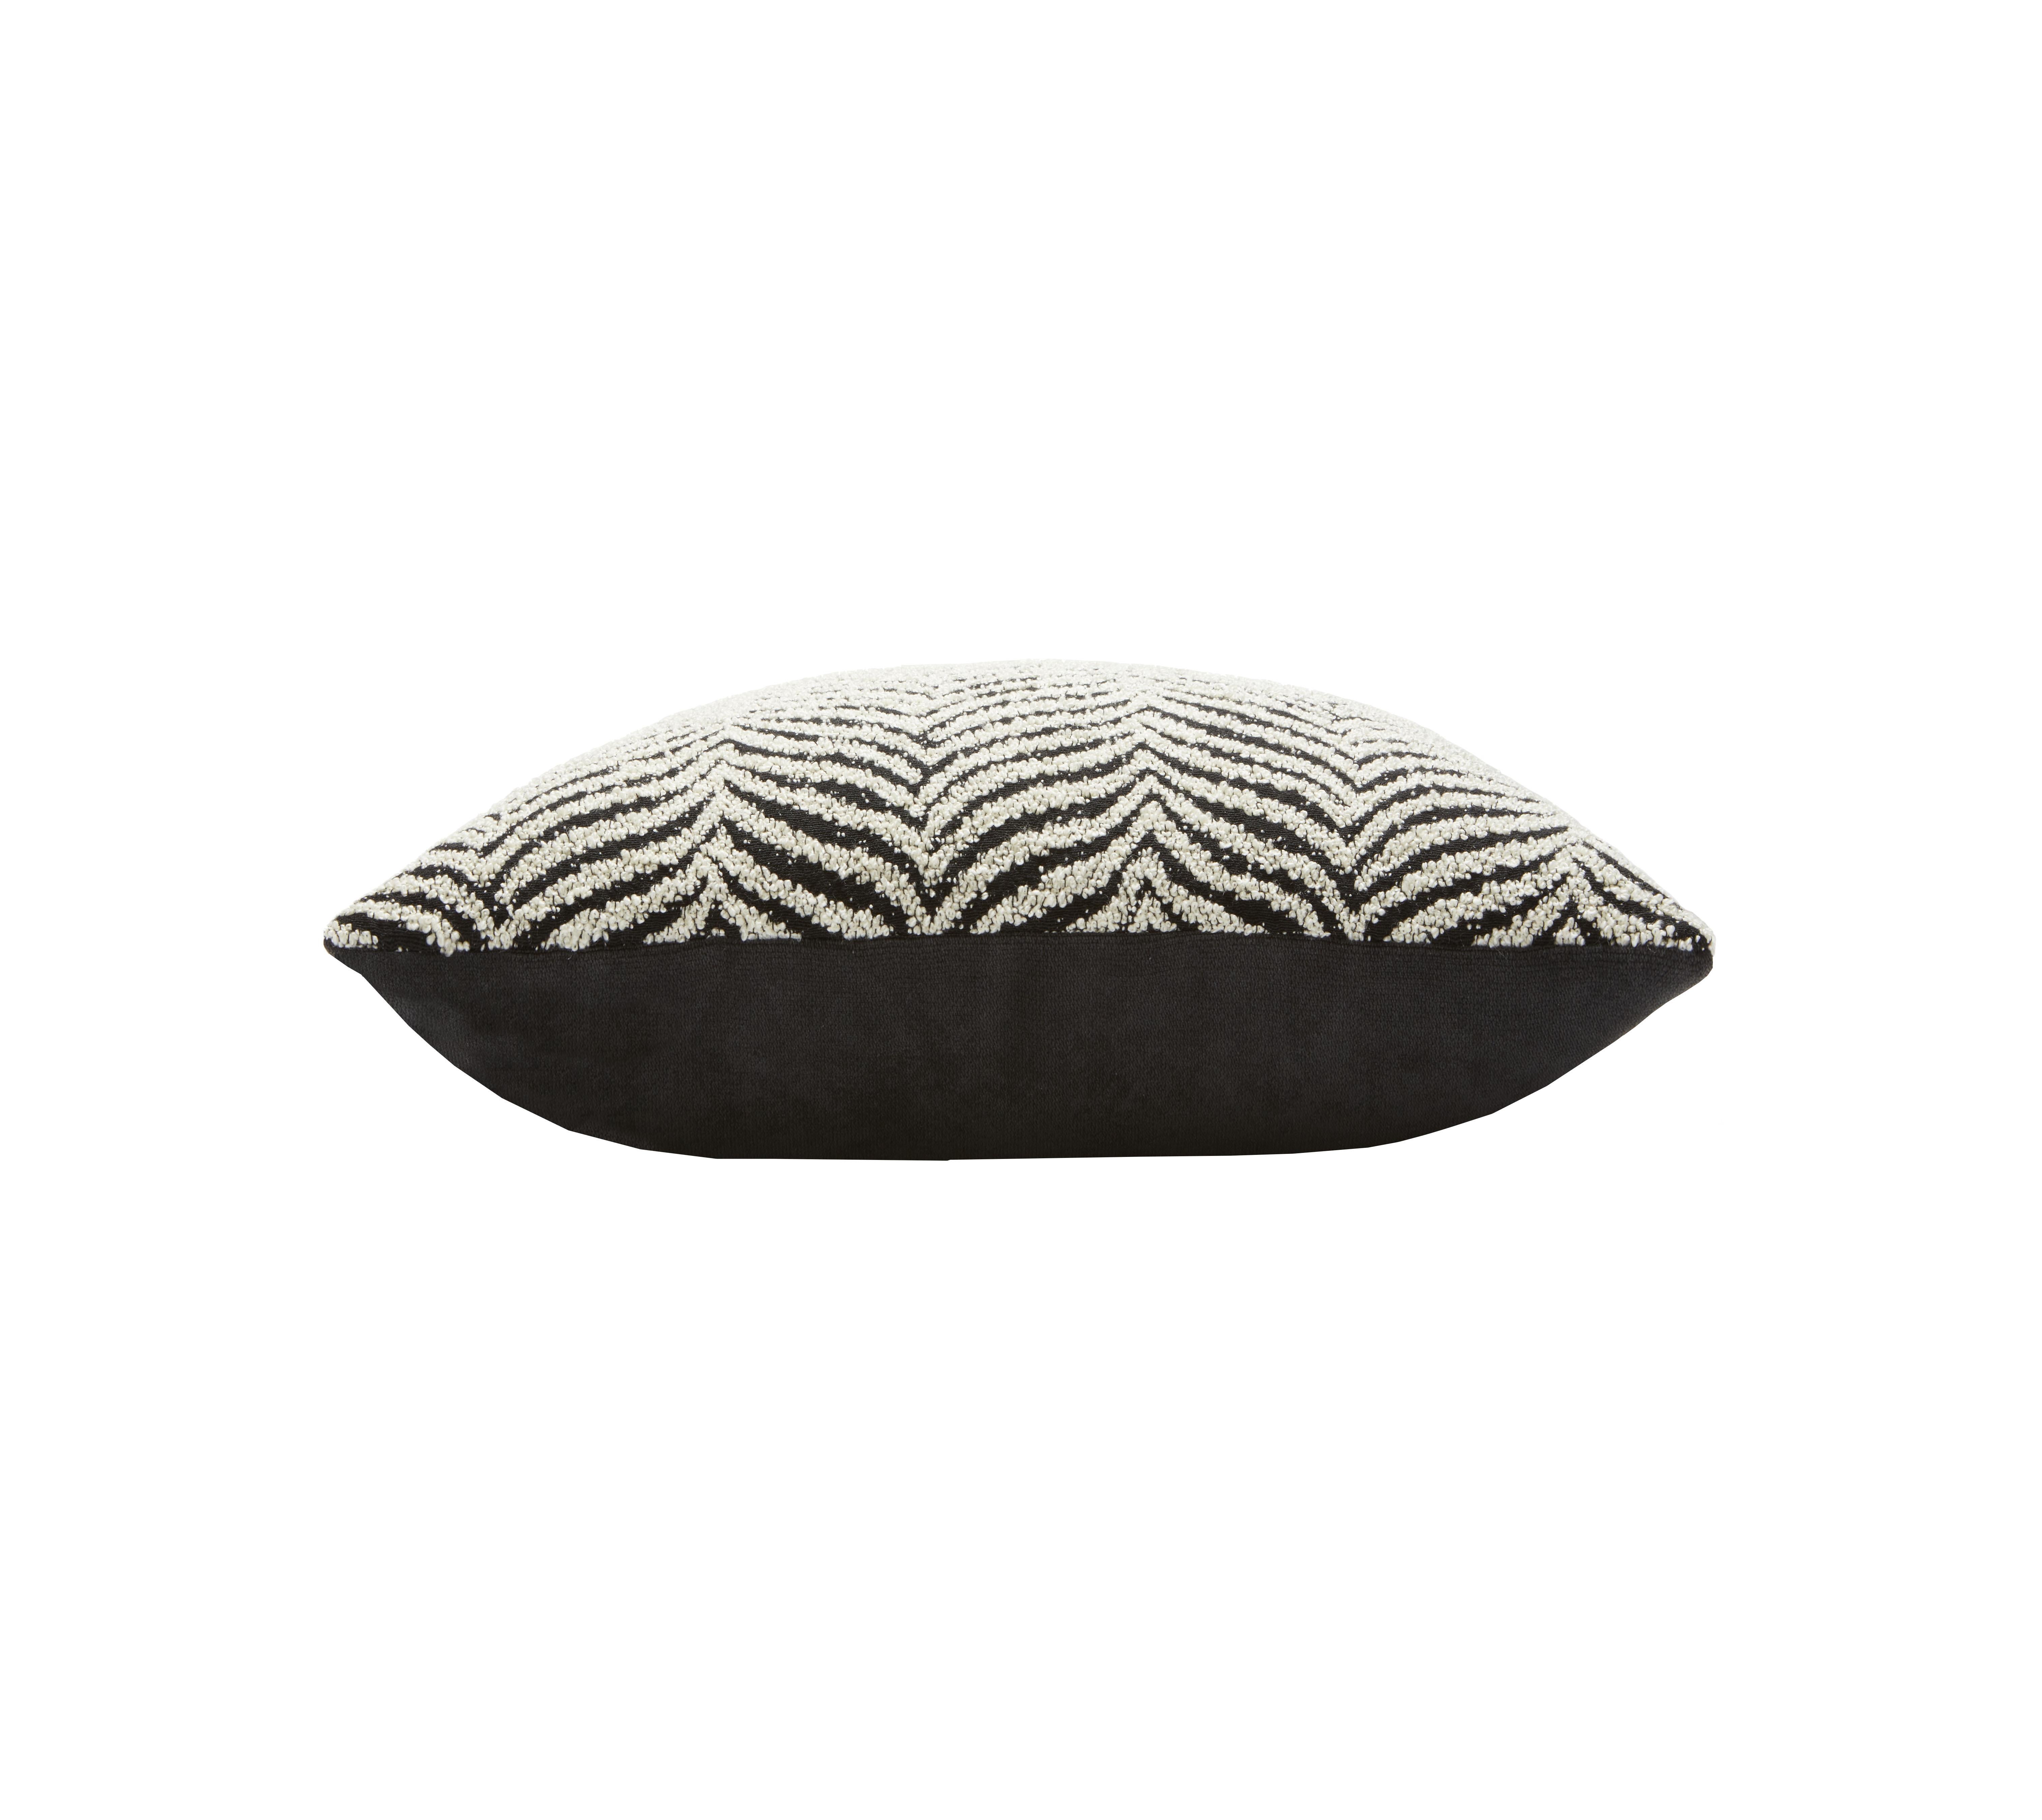 This glamorous cushion of sartorial value, the simplicity of a square profile gets counterbalanced by the richness of a Zebra-inspired contrasting pattern. This square pillow is a perfect balance between luxurious materials, traditional décor, and